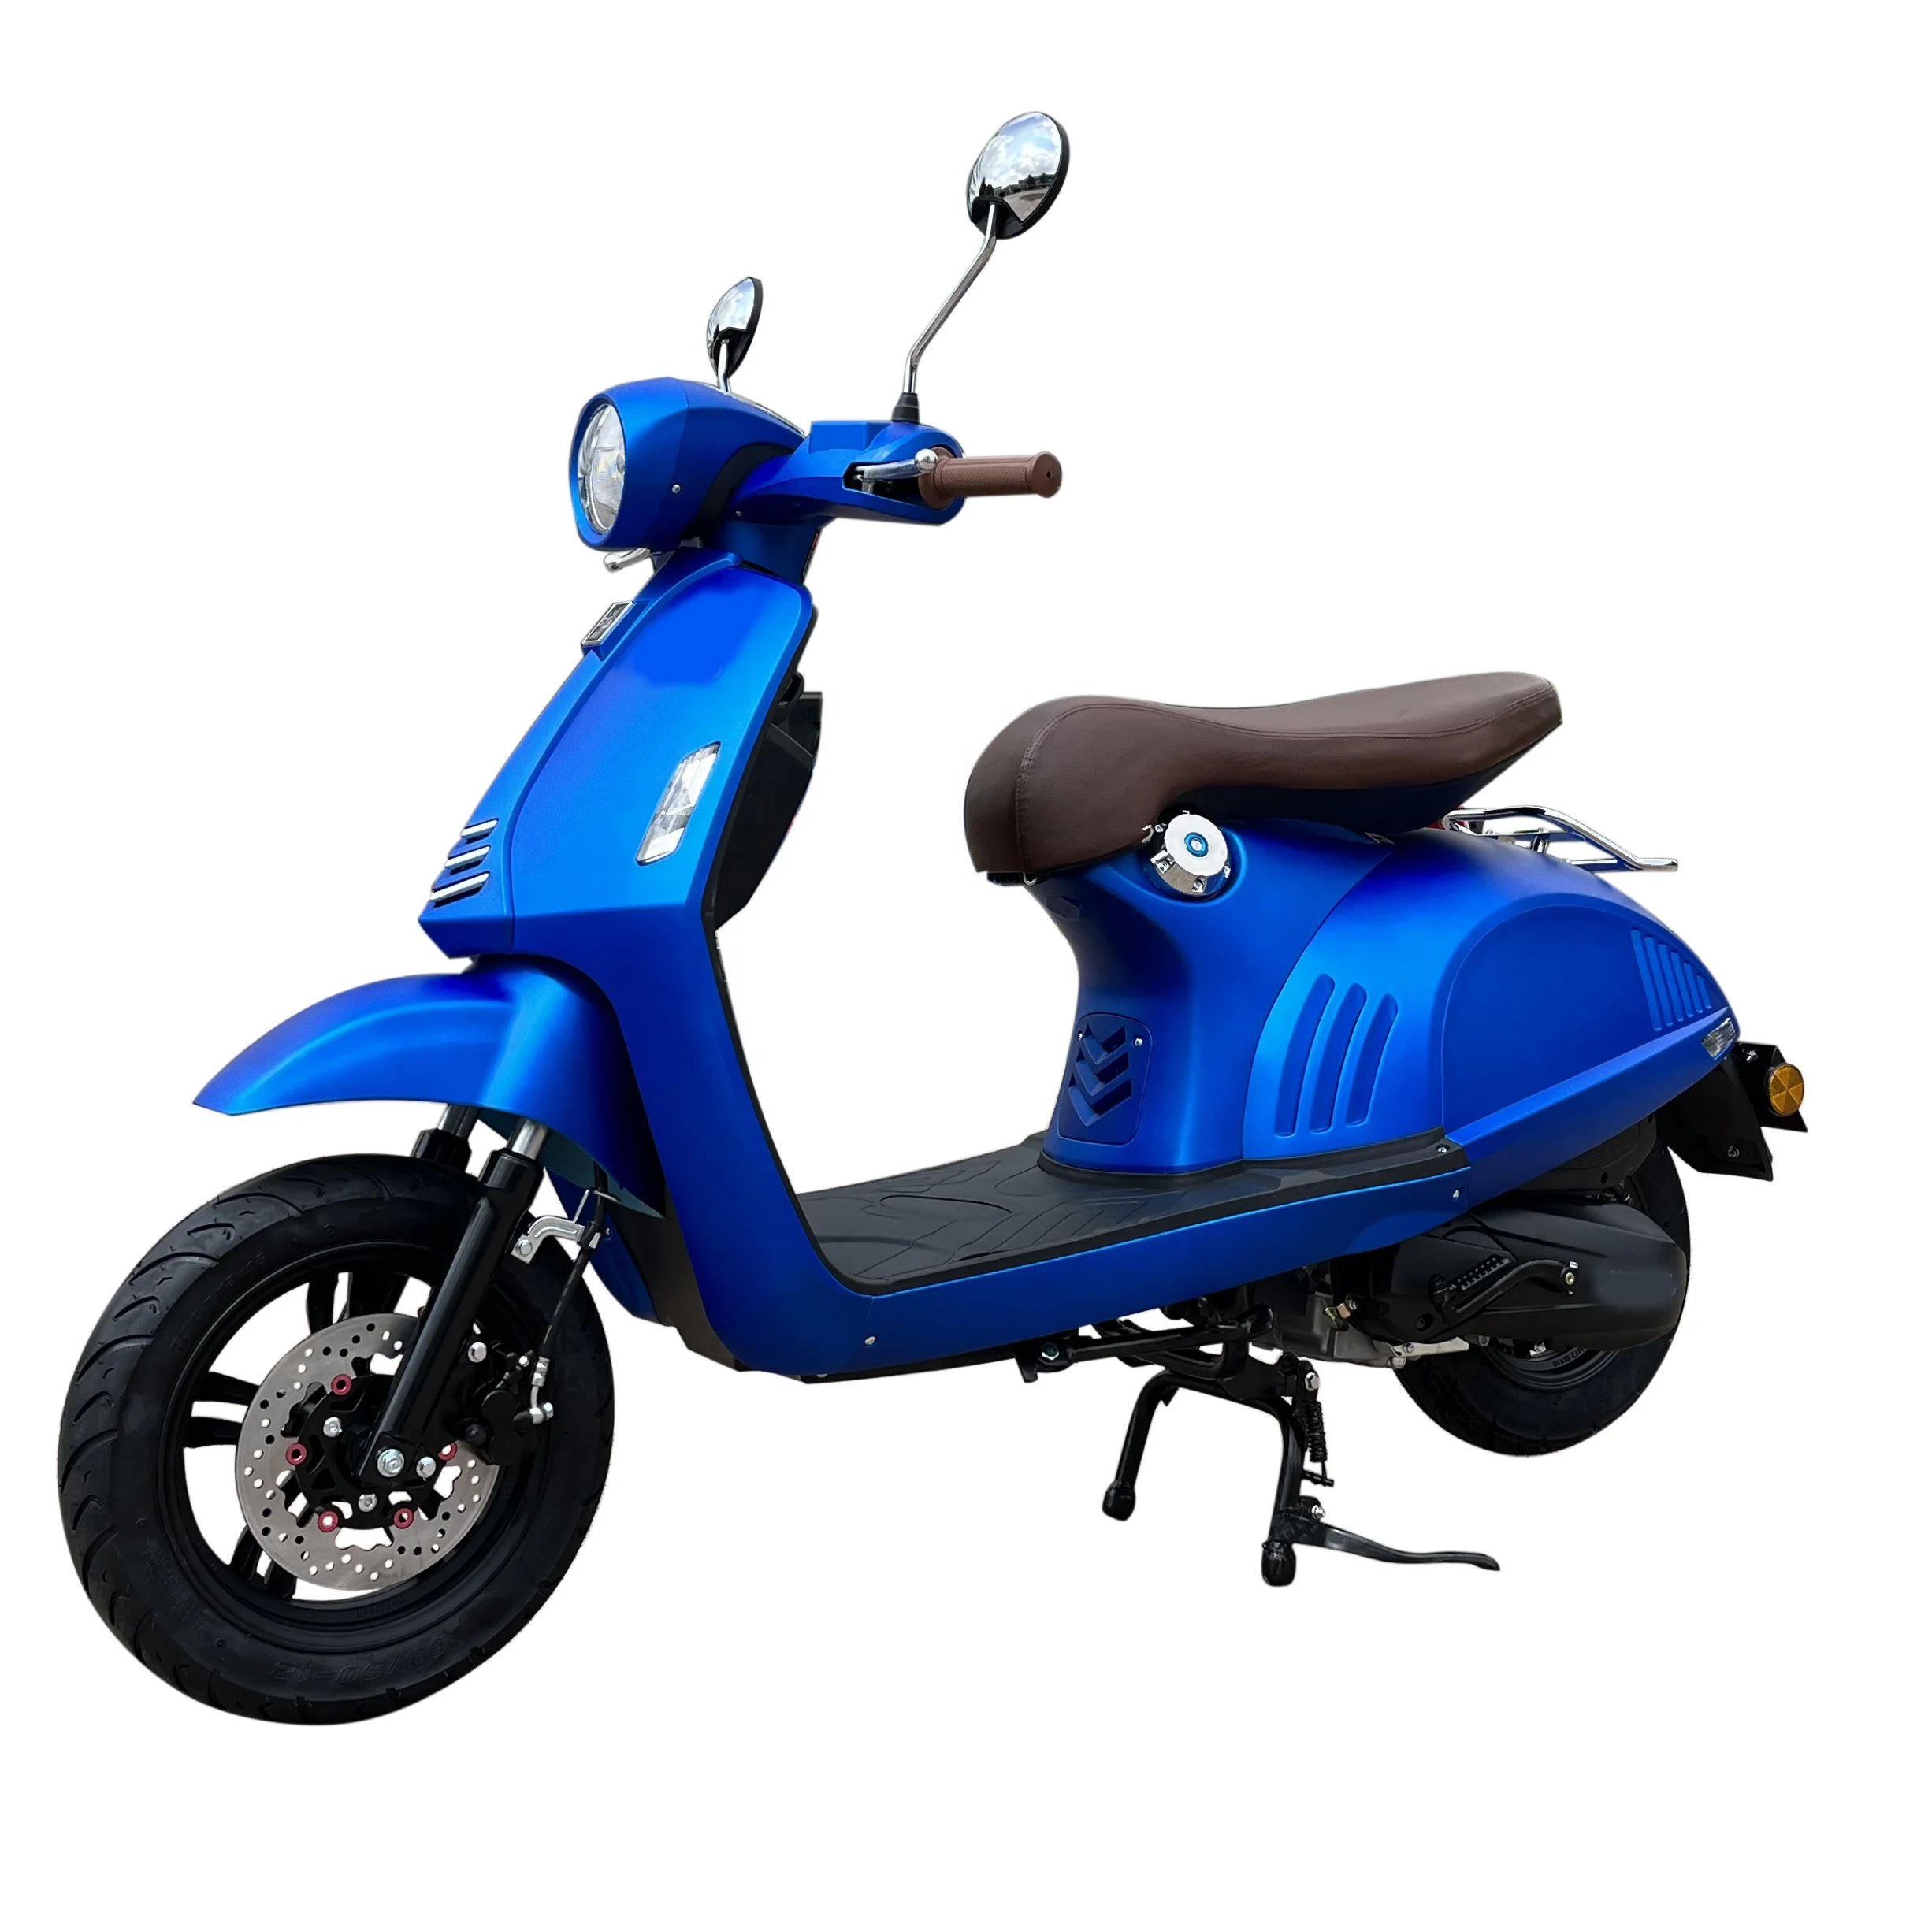 

Good Quality Long Range 125cc 150cc 946 Mopeds EFI ABS CBS Gas Gasoline Powered Scooters RACING MOTORCYCLE